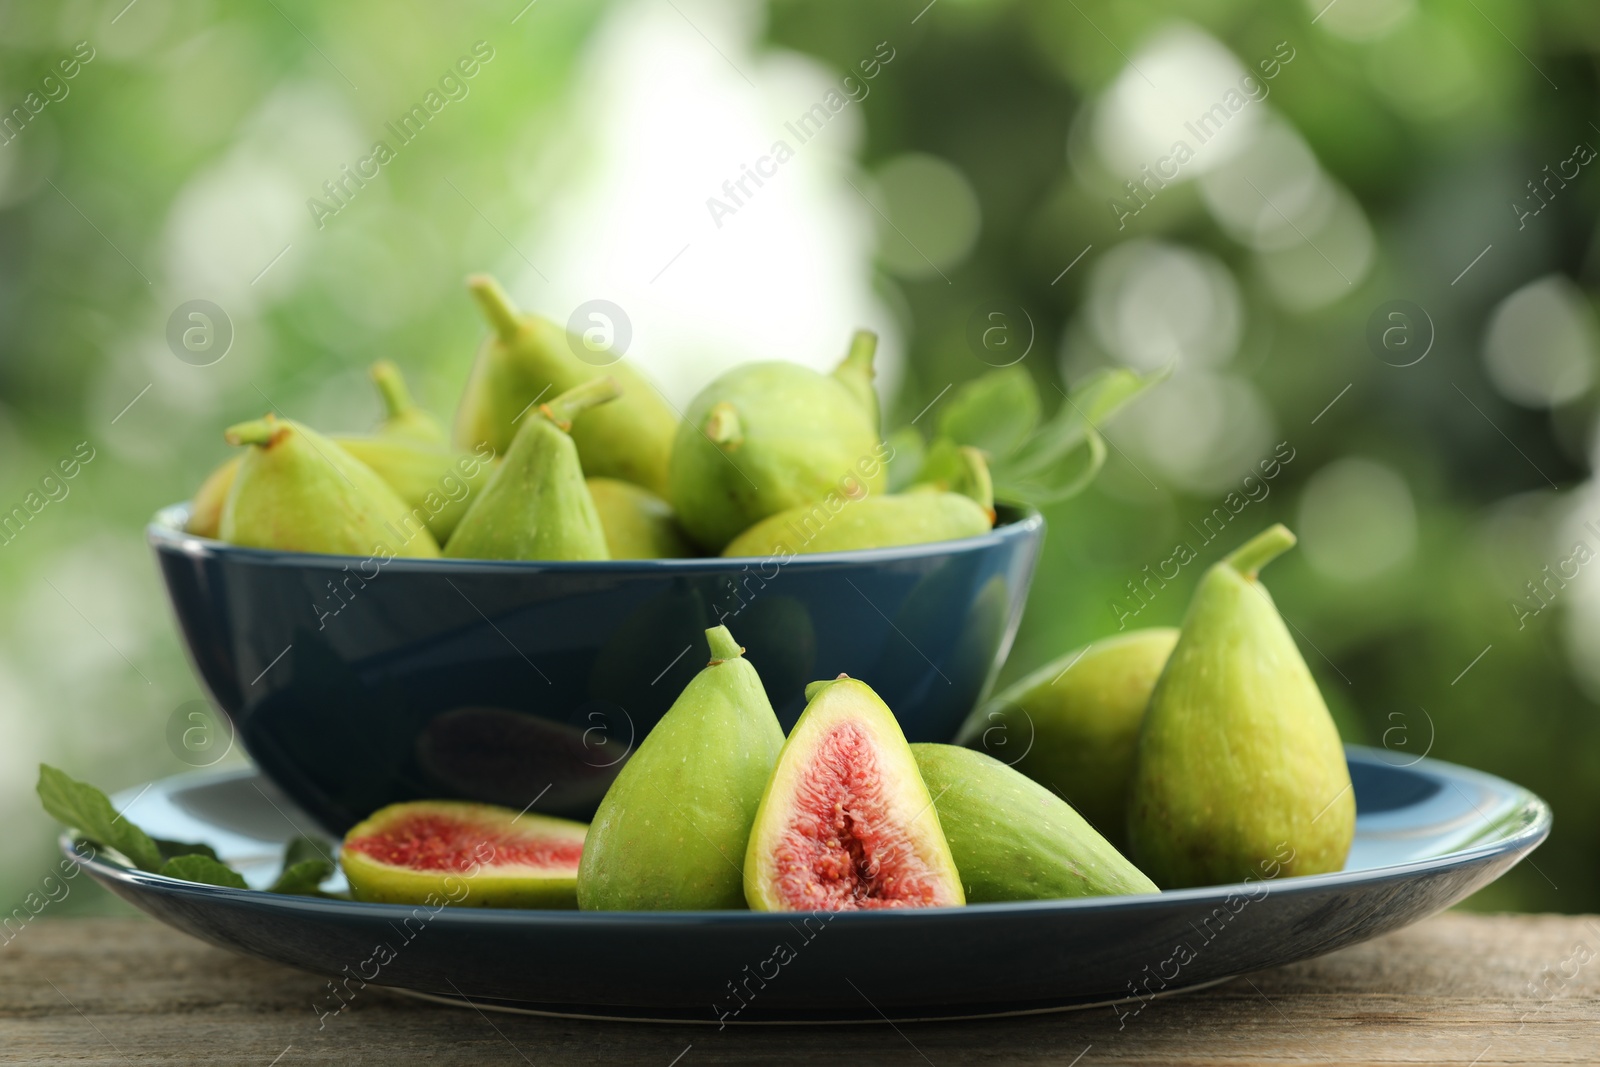 Photo of Cut and whole green figs on wooden table against blurred background, closeup